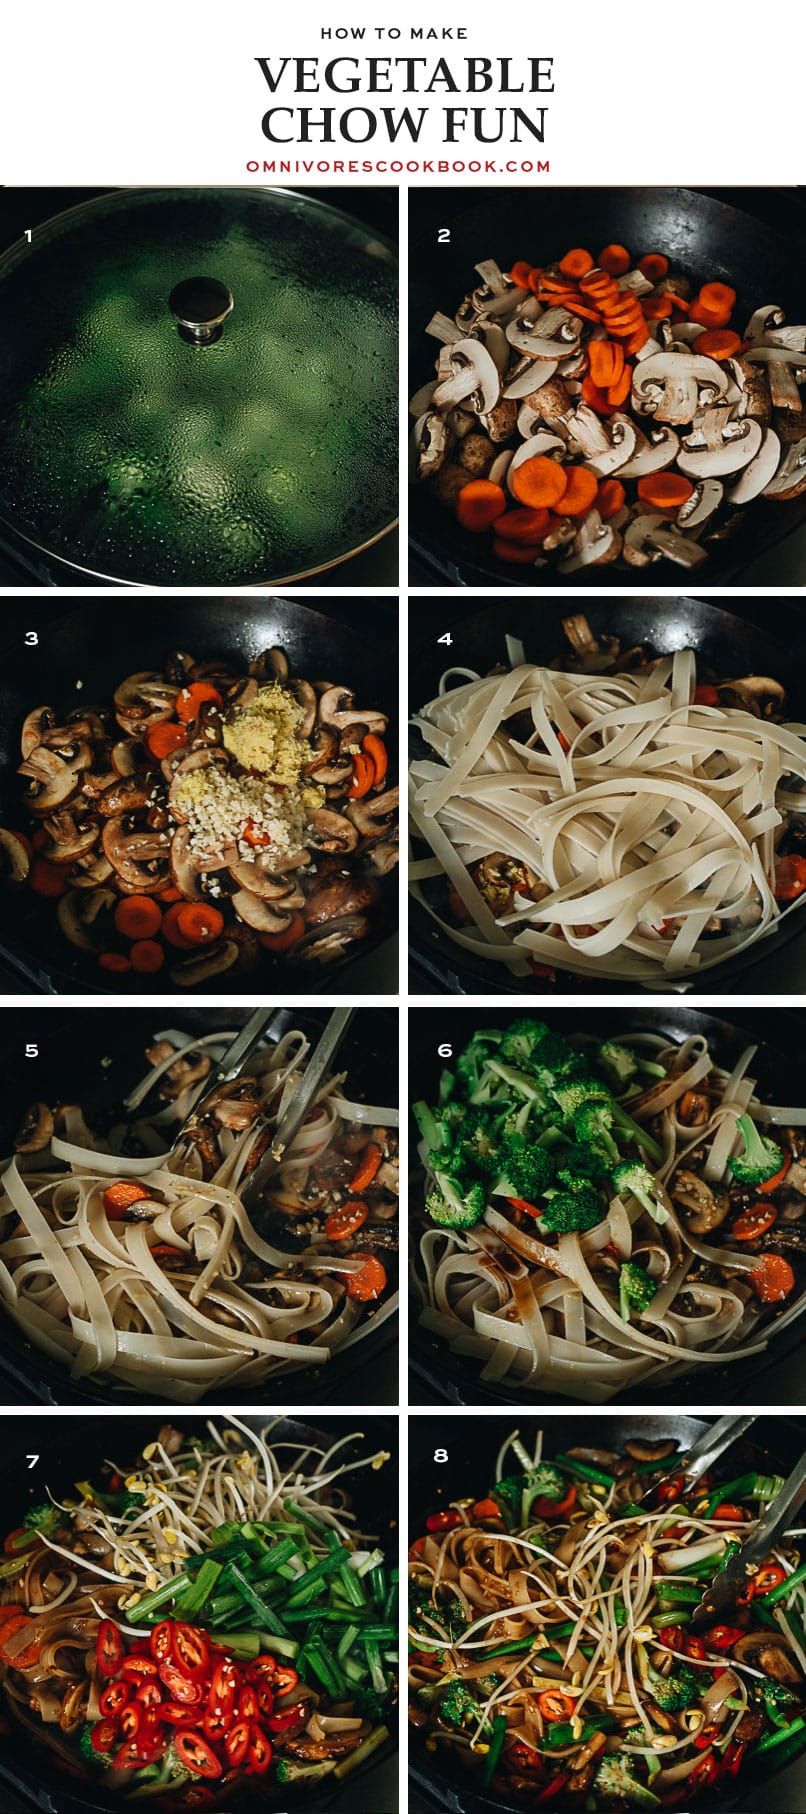 Vegetable chow fun cooking step-by-step